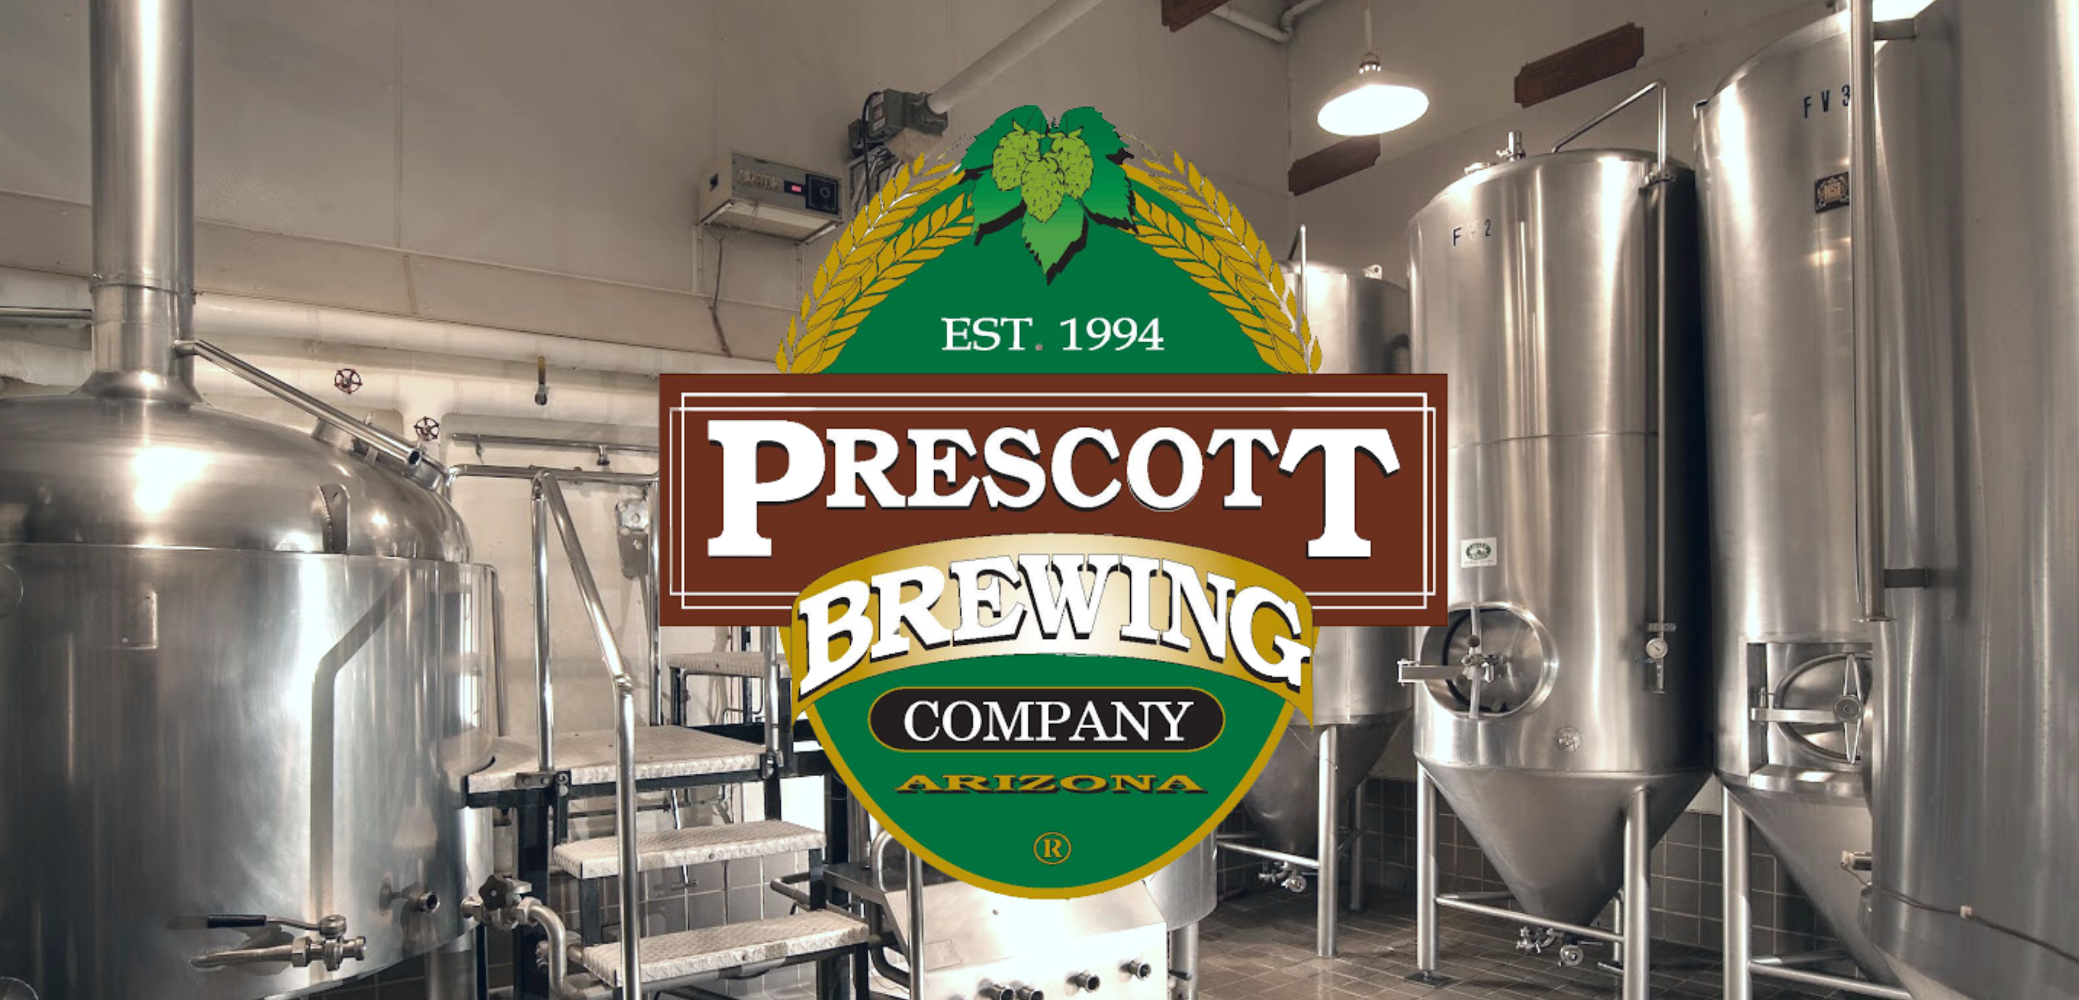 7 BBL Microbrewery Auction - Prescott Brewing Co: 7 BBL 2-Vessel Brewhouse, Fermenters and Serving Tanks to 15 BBL, Chiller, Boiler, Mill & More